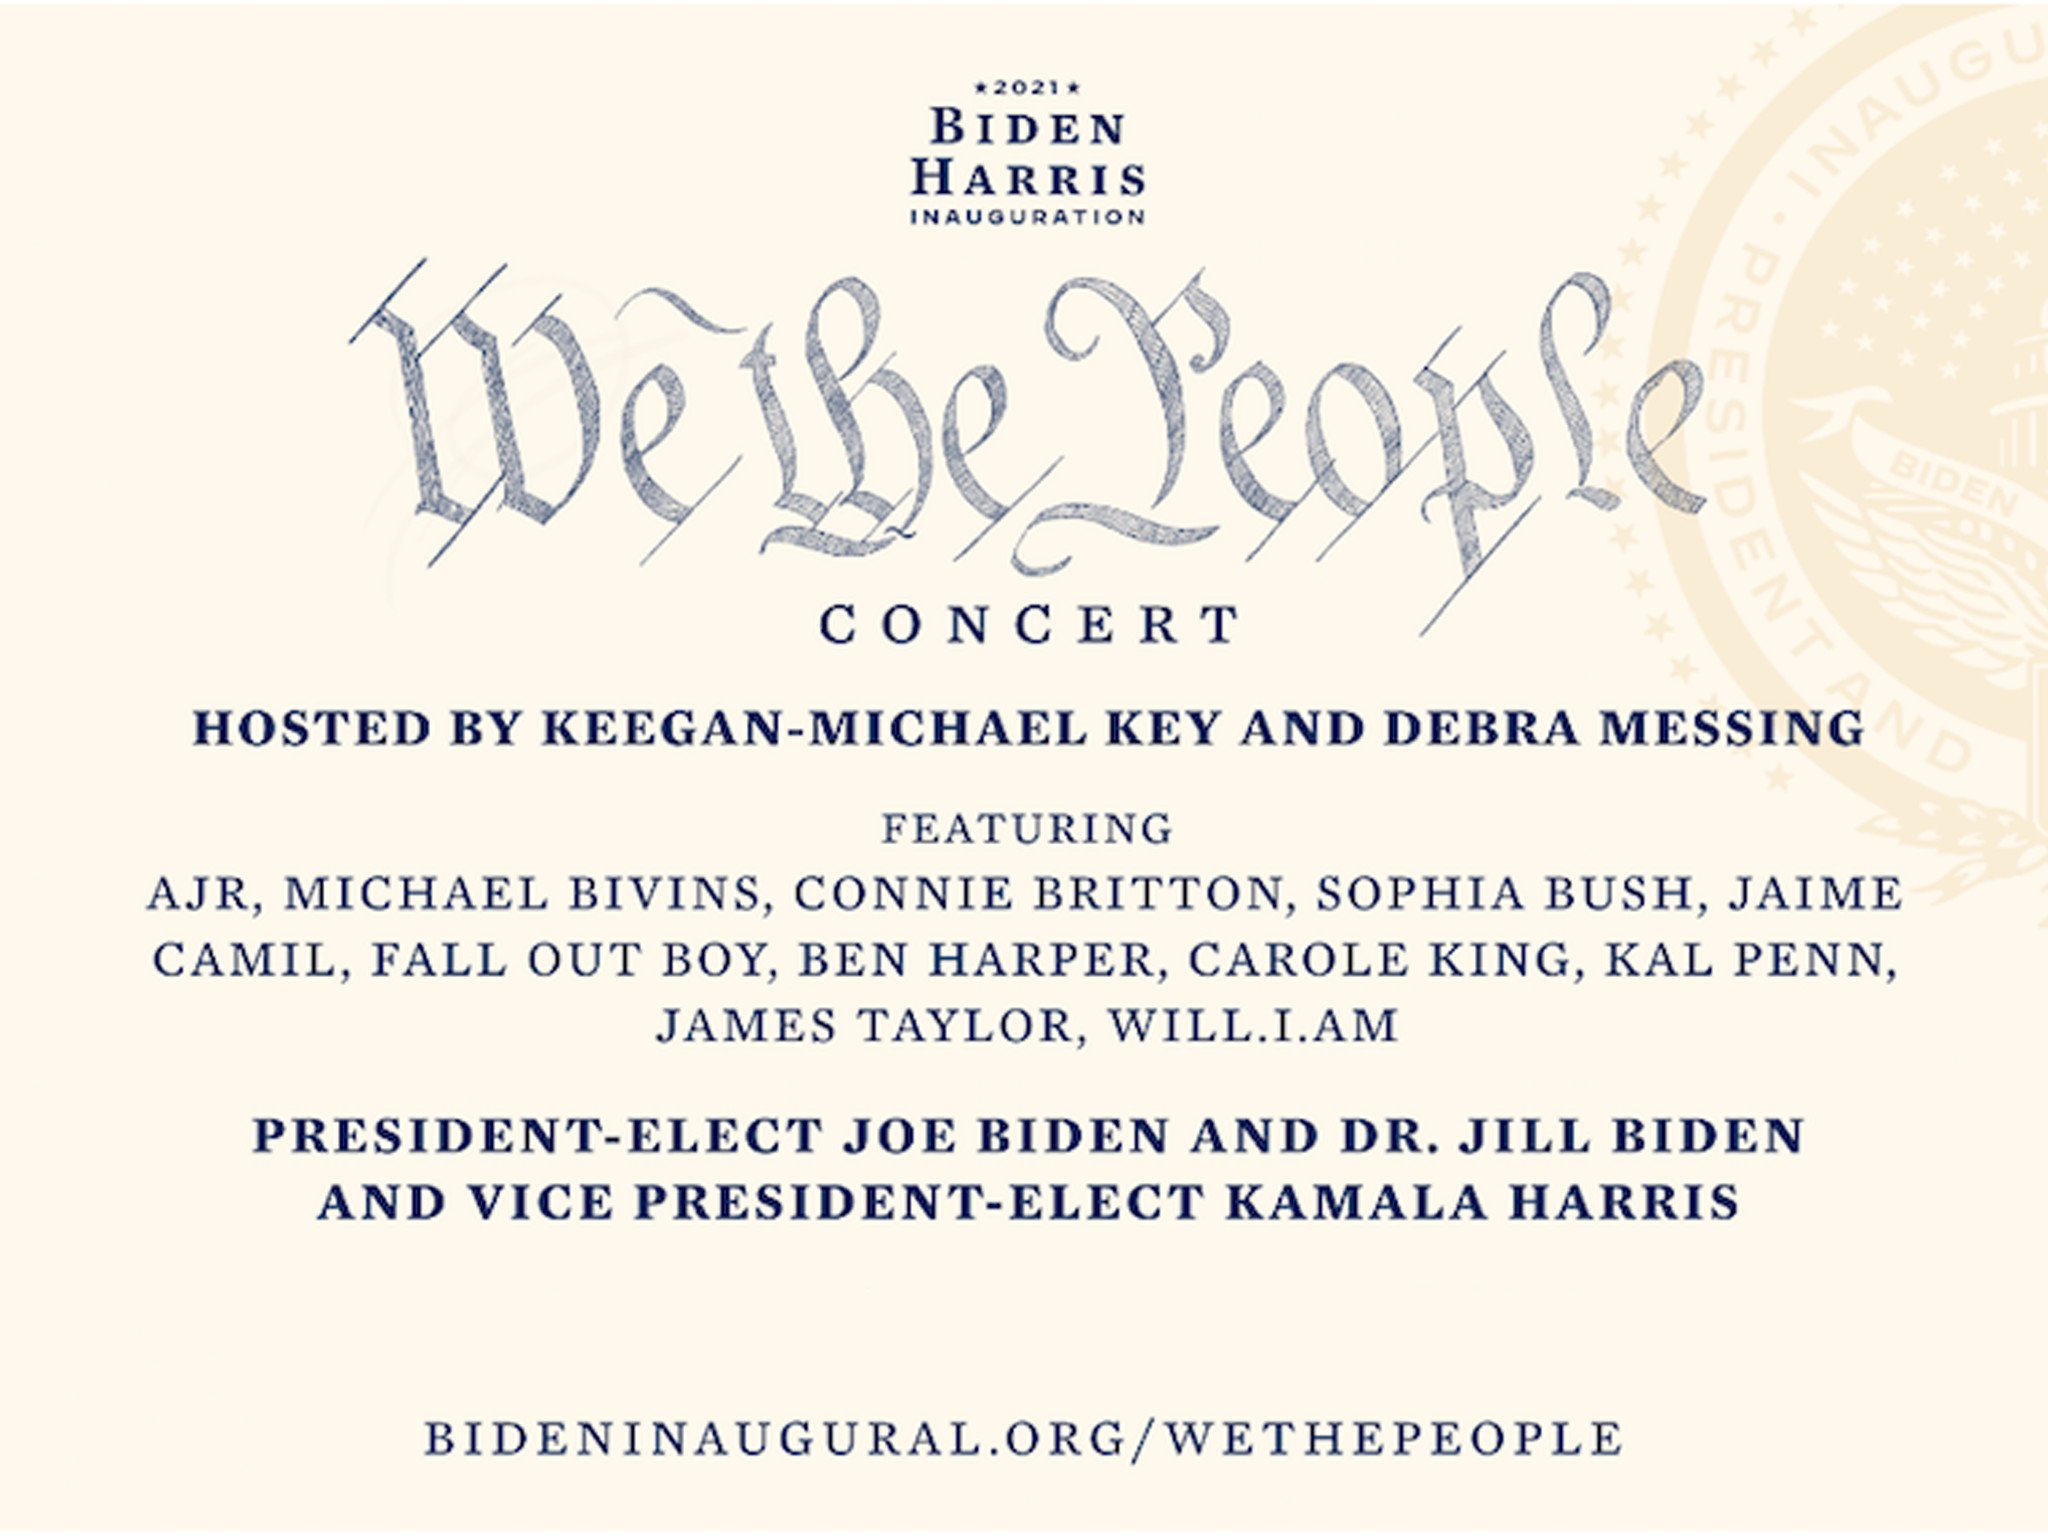 How to watch ‘We The People’ concert live: Stream the virtual inauguration concert from anywhere